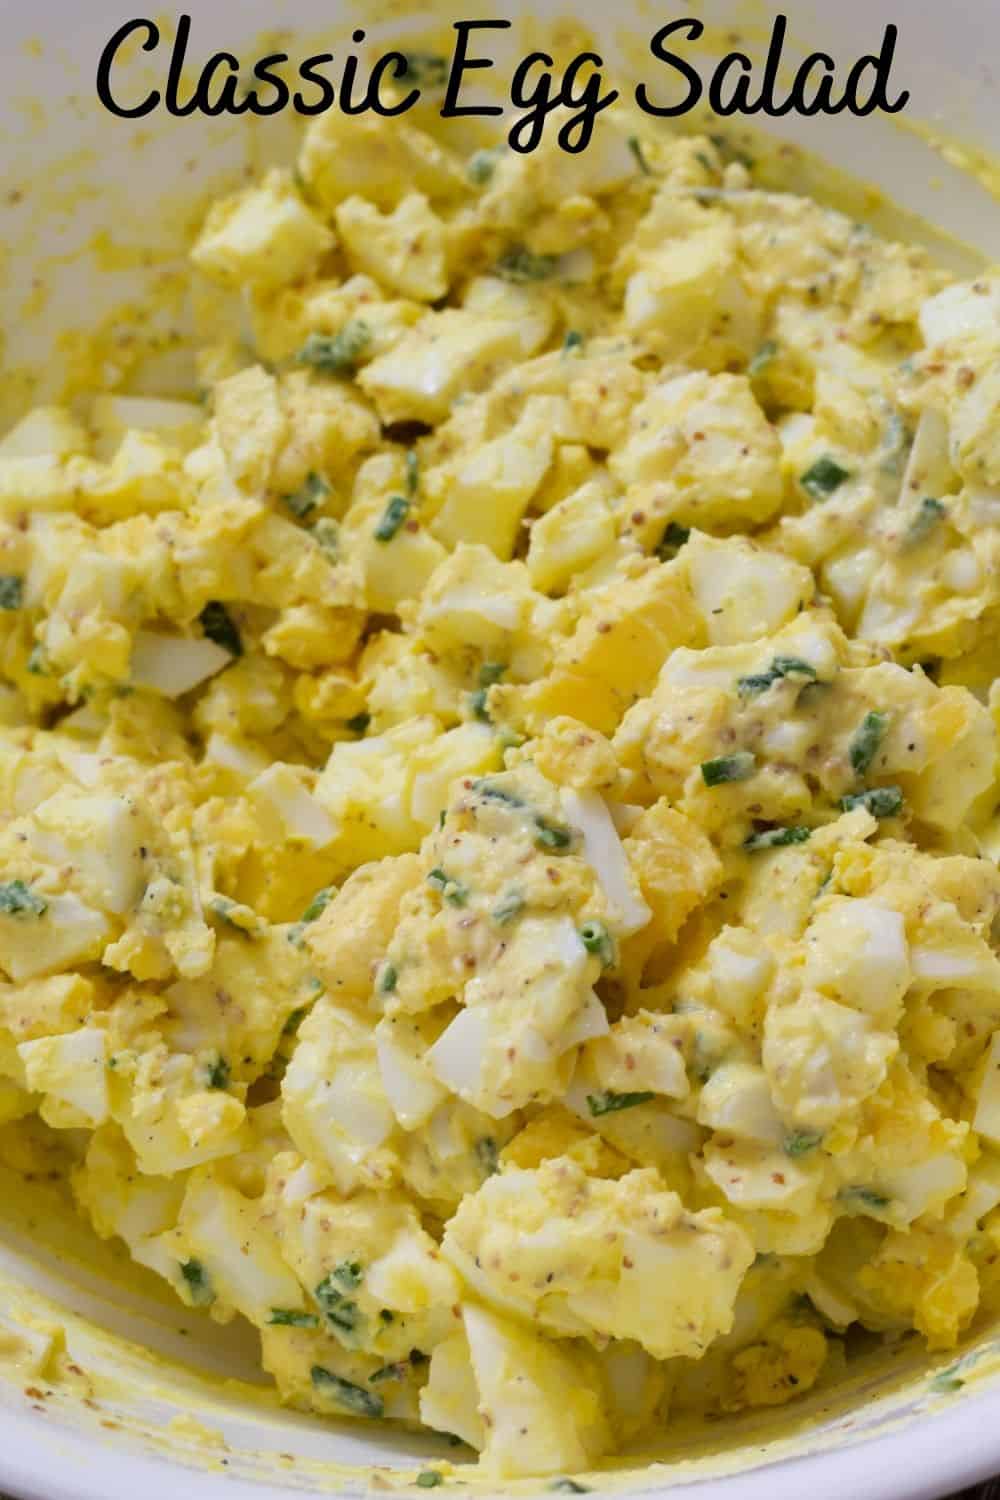 How to make a Classic Egg Salad sandwich with mayonnaise, grainy Dijon mustard, salt pepper and chives. An easy, simple and quick recipe. #eggsalad #sandwichrecipe #lunchtime #protein